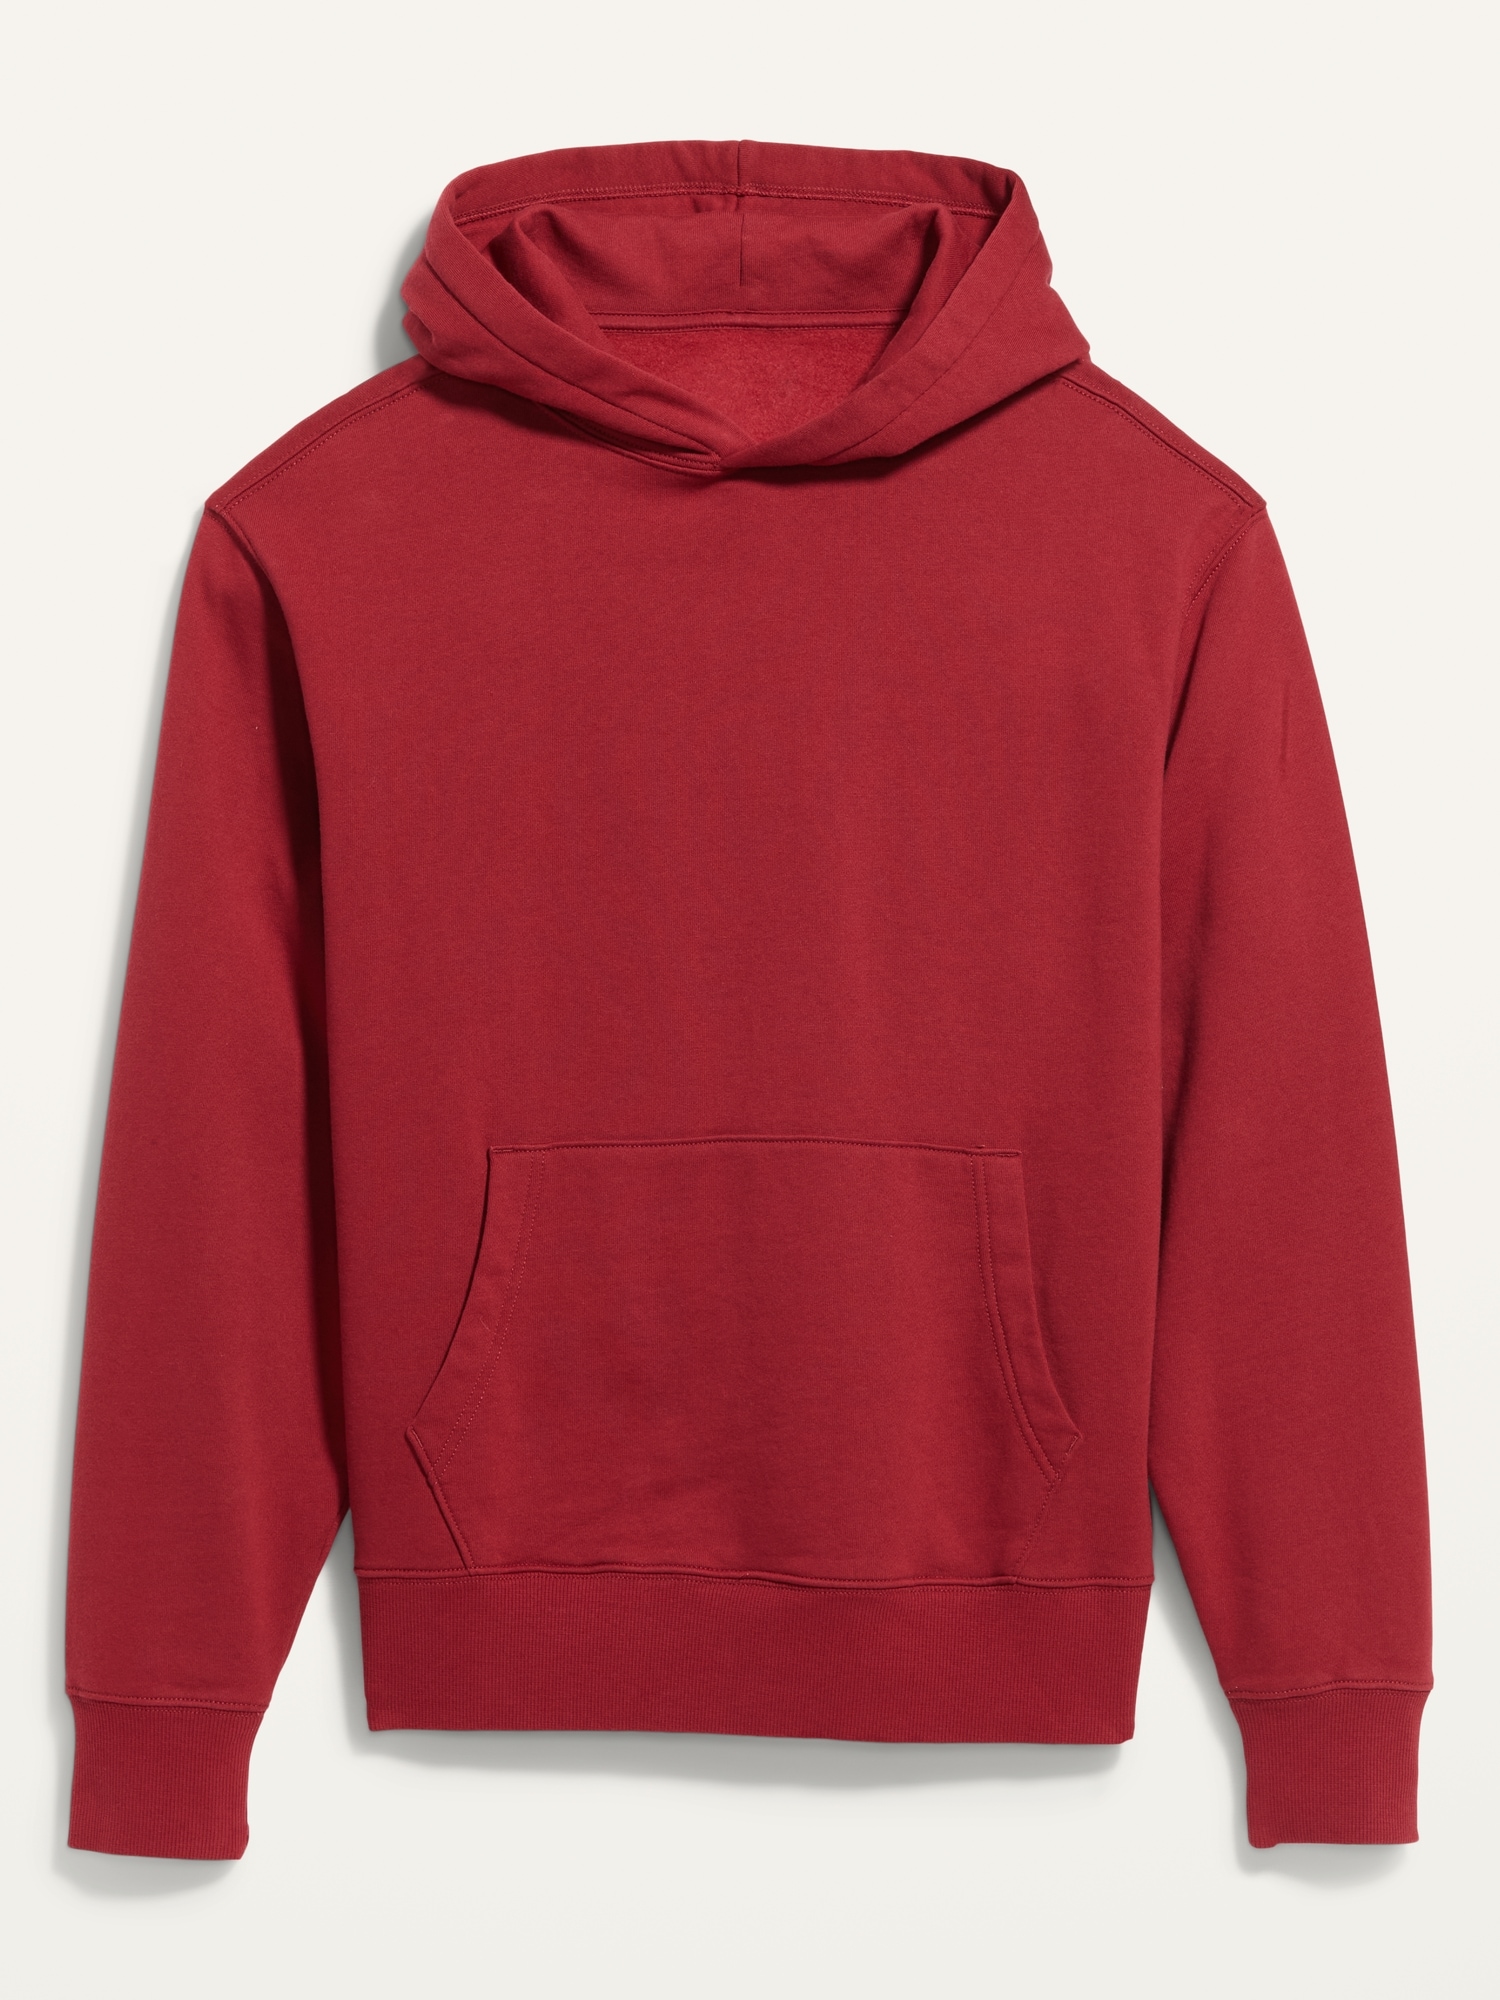 Old Navy Pullover Hoodie for Men red. 1